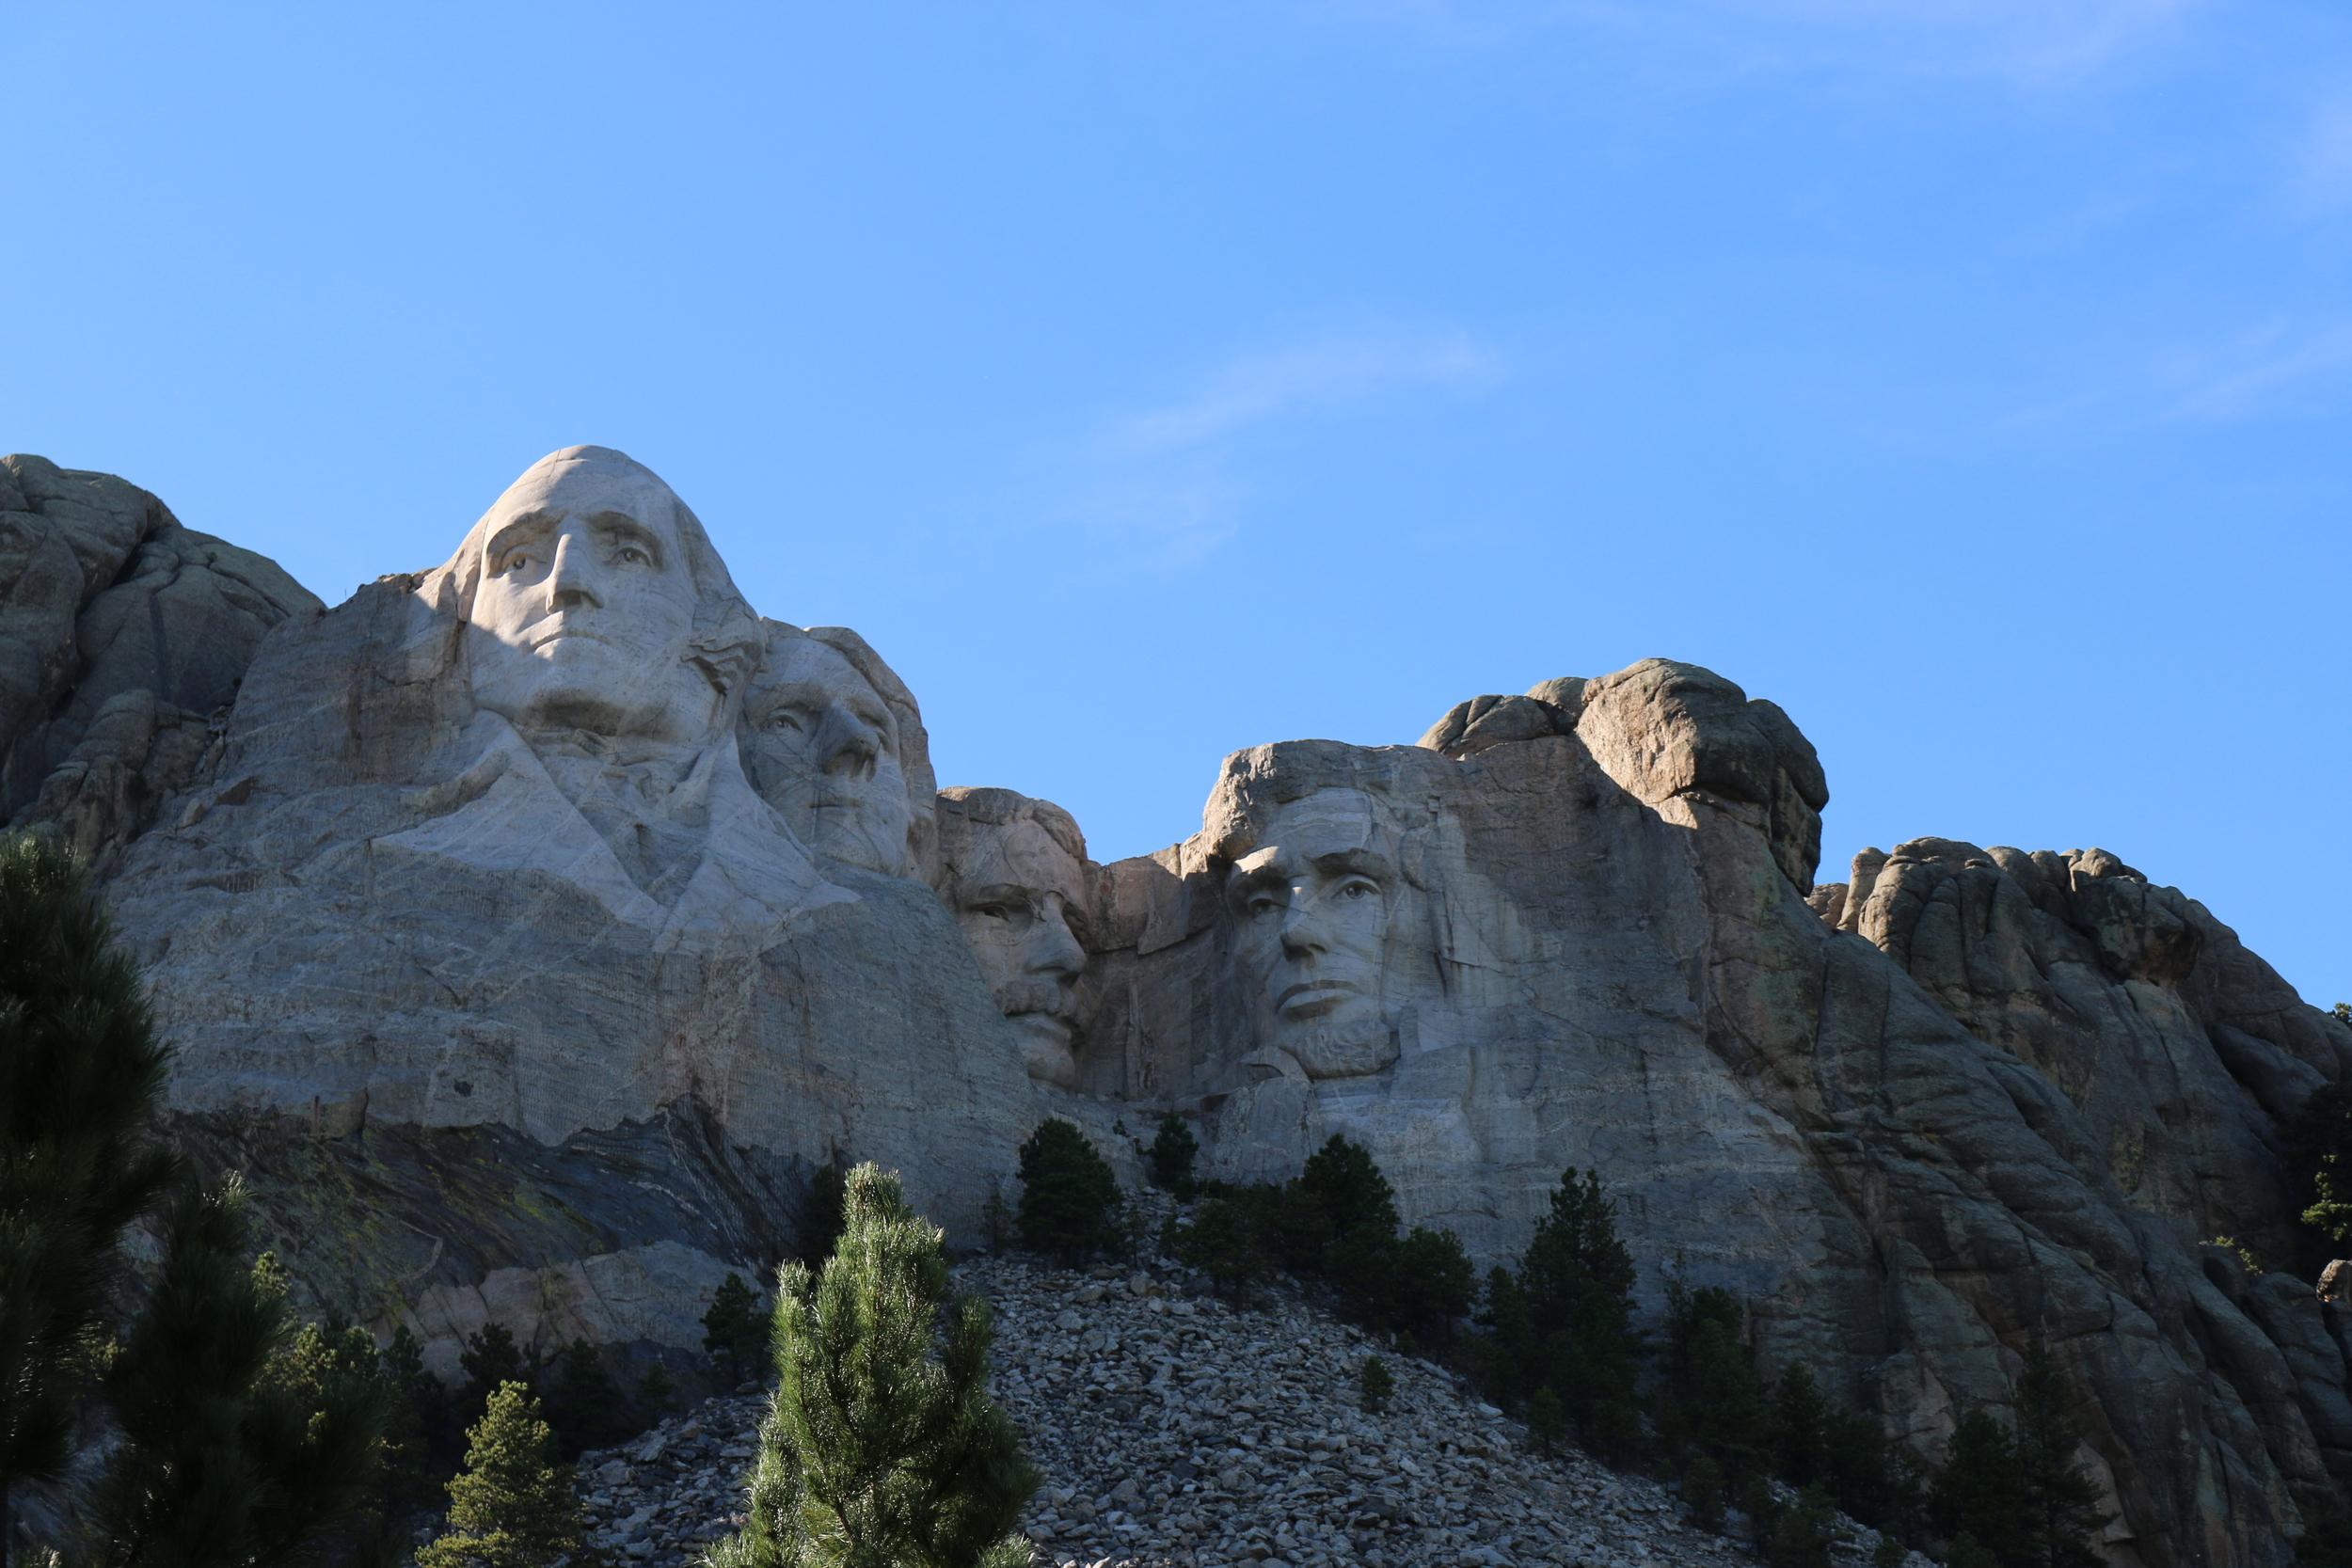 Mount Rushmore National Monument, Black Hills, SD.